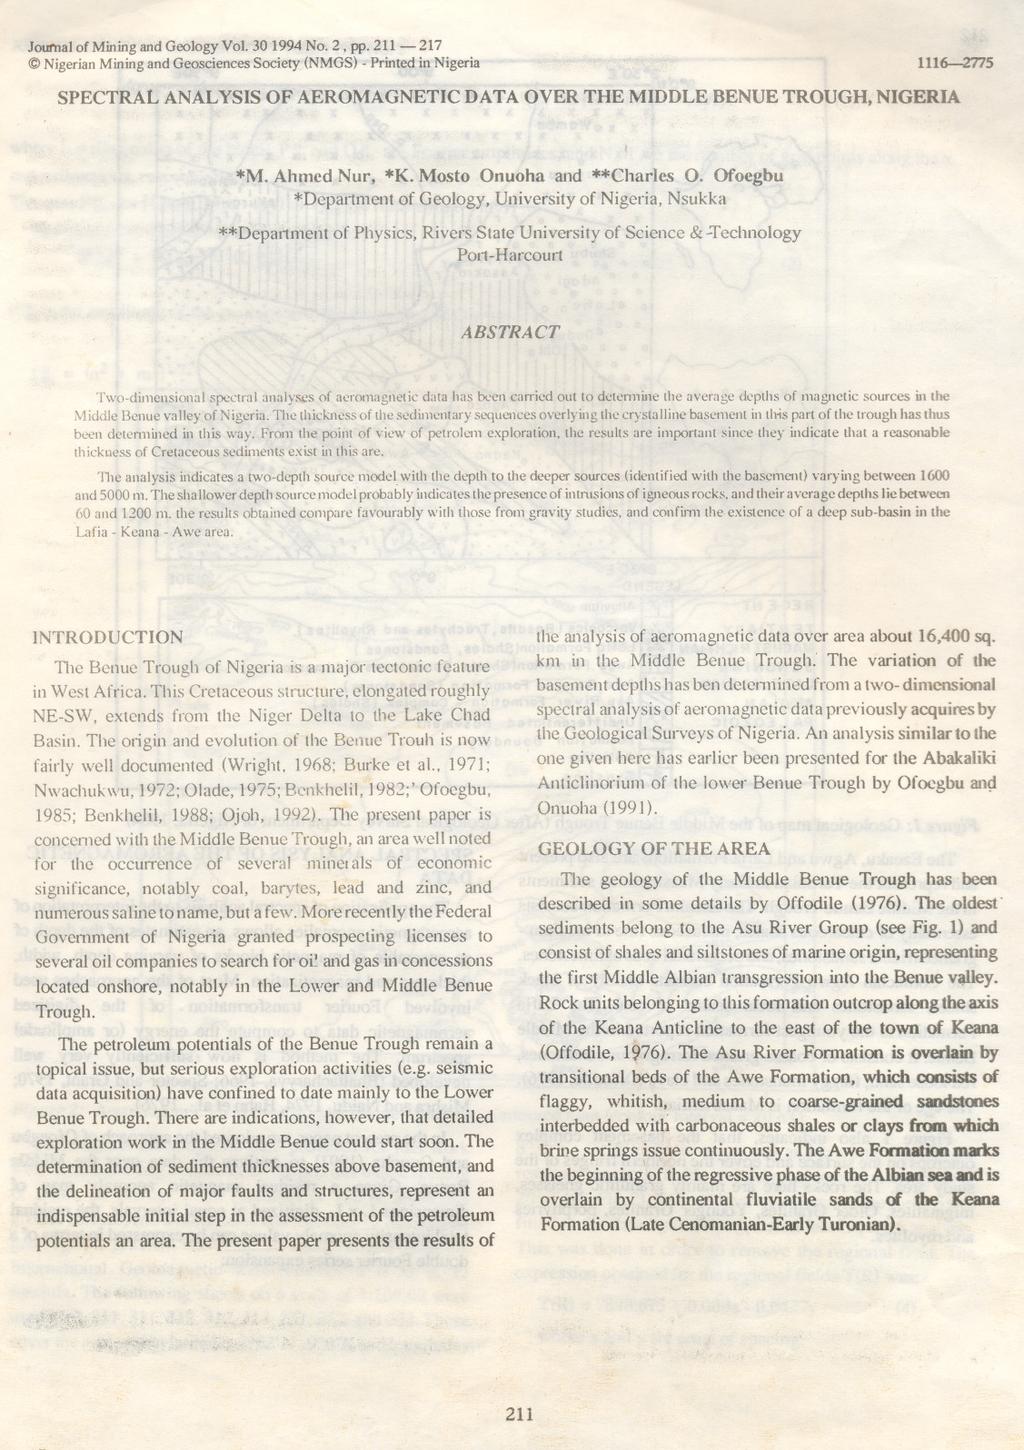 Journal of Mining and Geology Vol. 30 1994 No.2, pp.